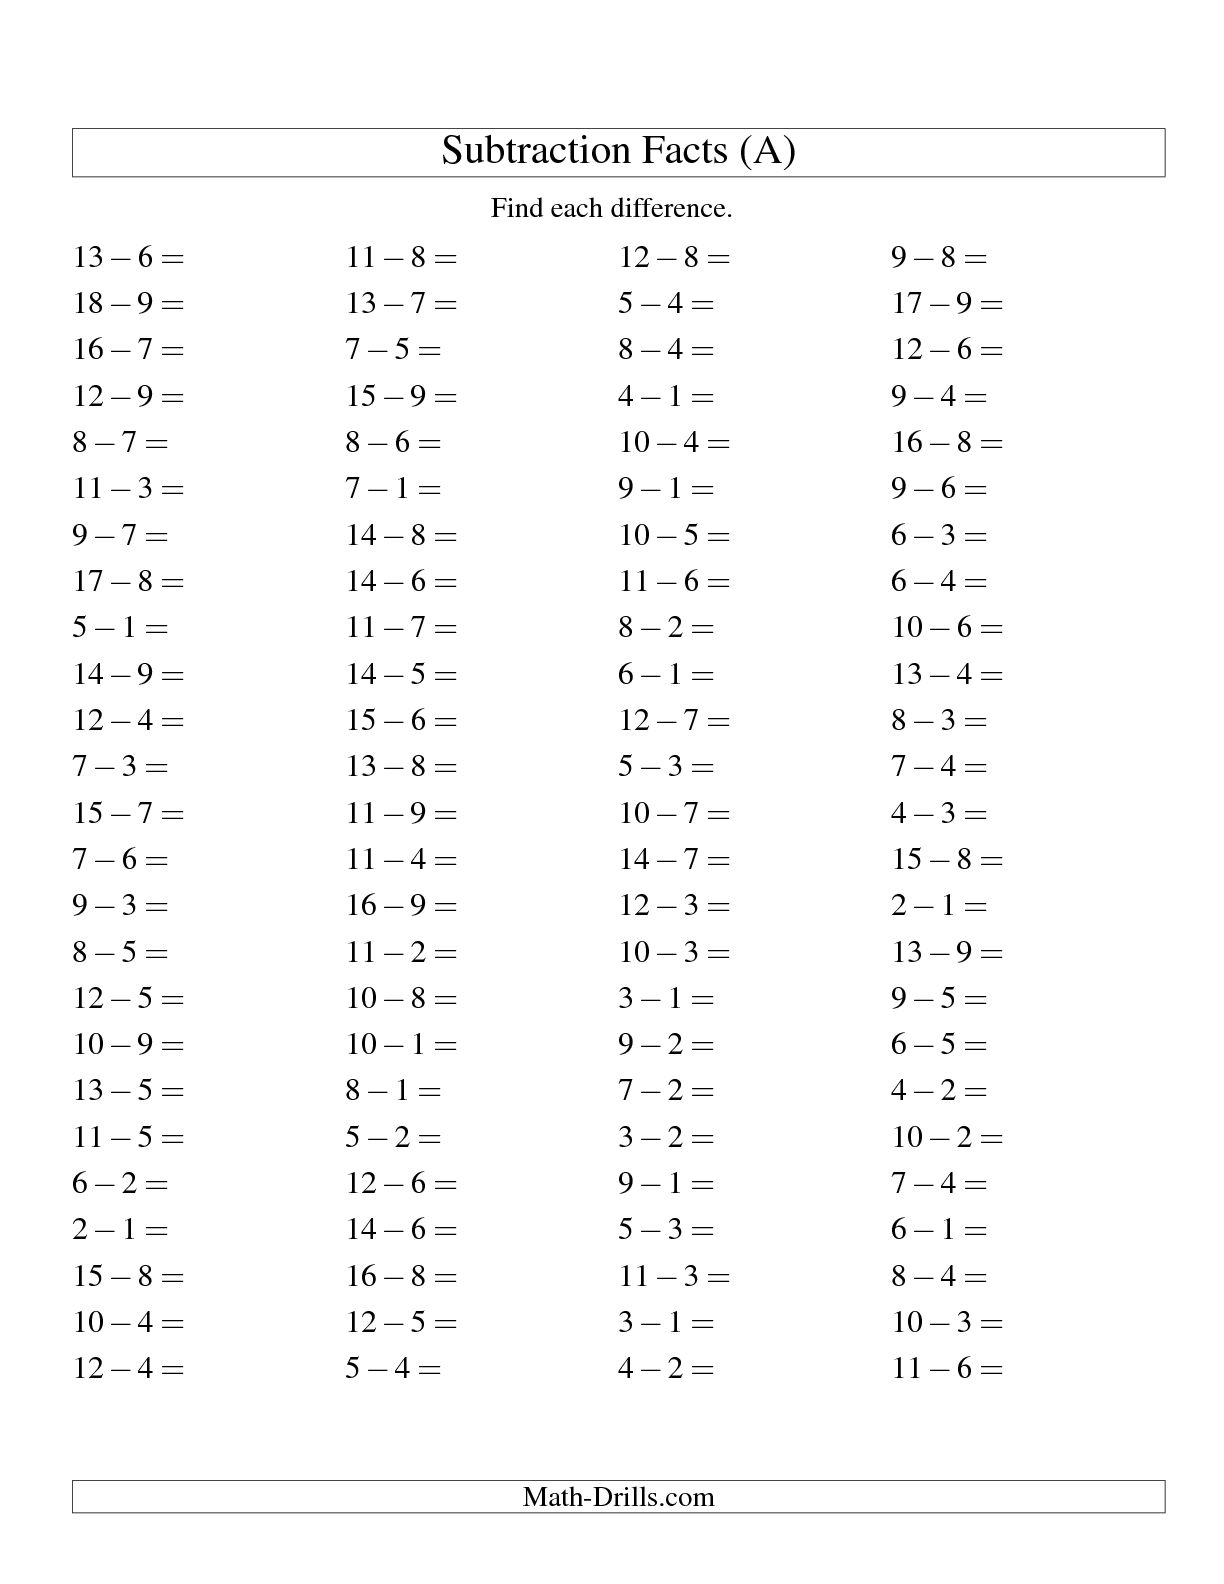 Subtraction Math Facts Worksheets Image